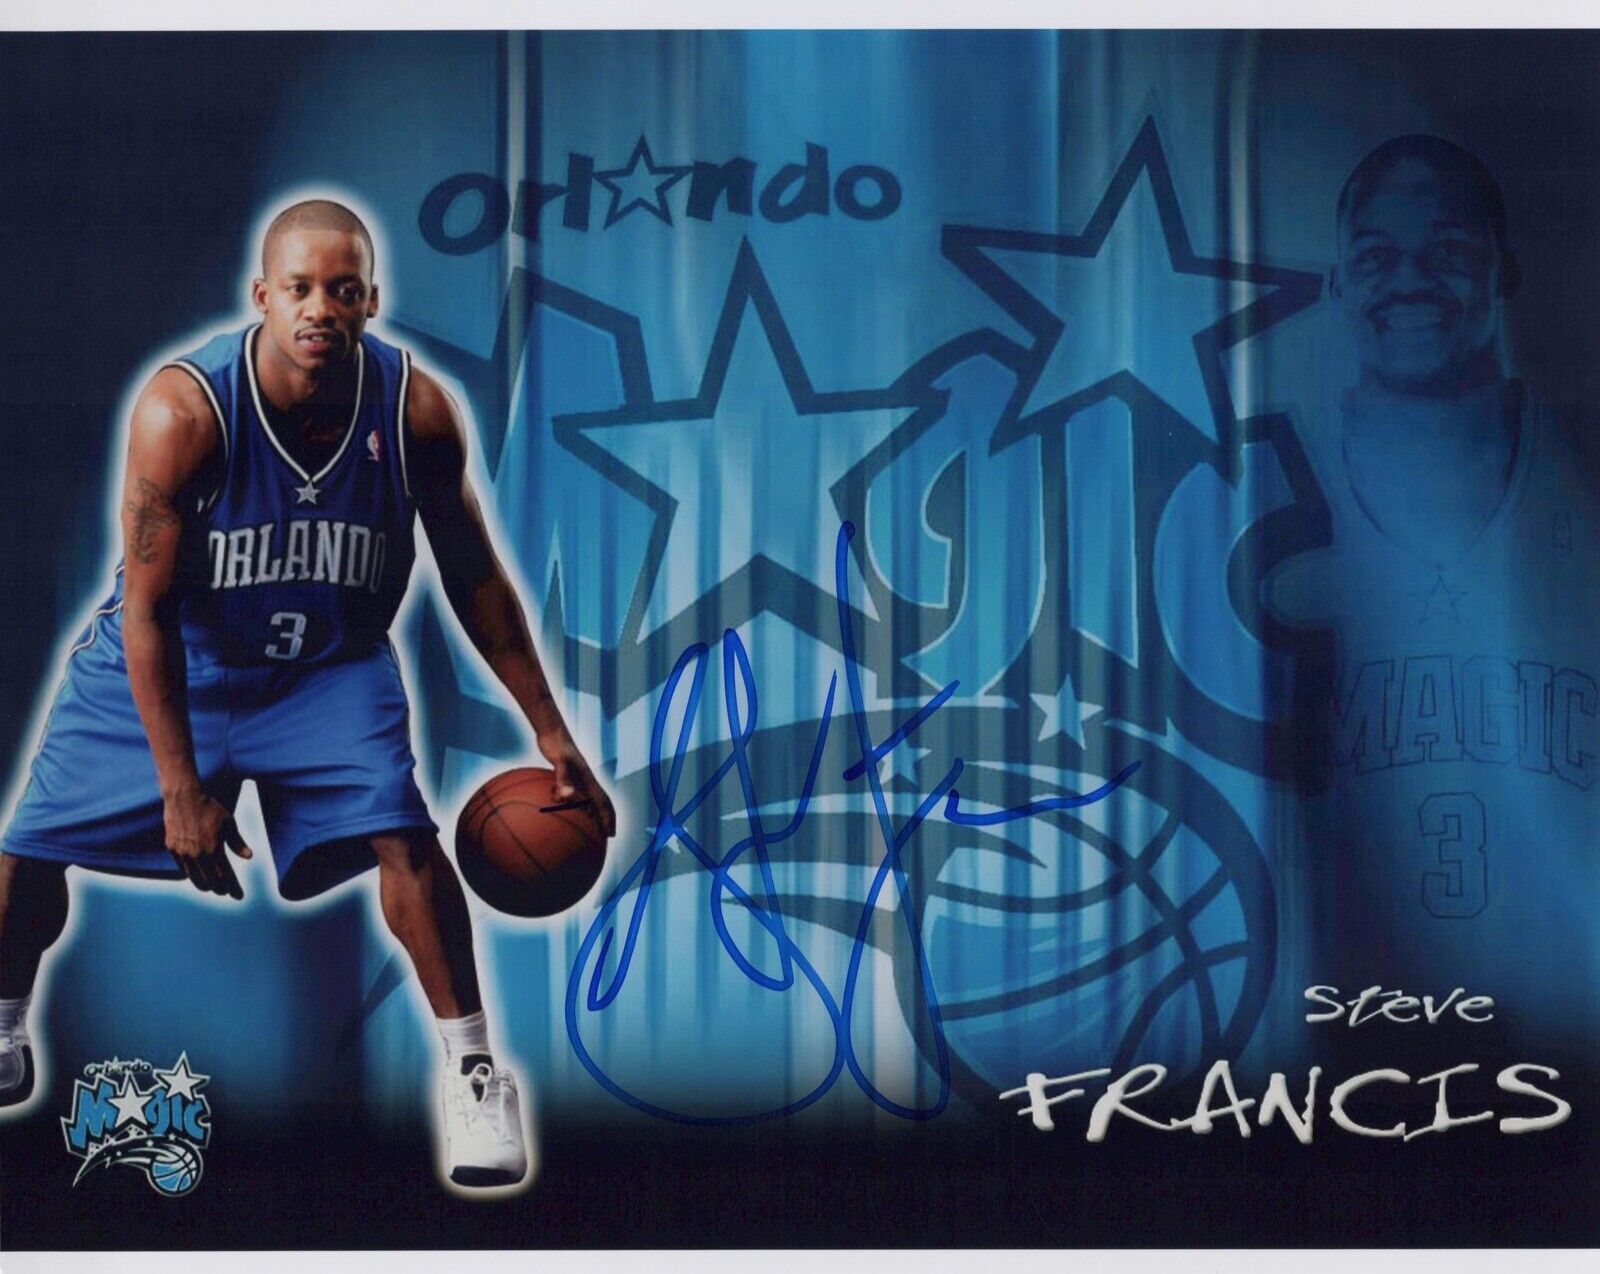 STEVE FRANCIS signed Autographed ORLAND MAGIC